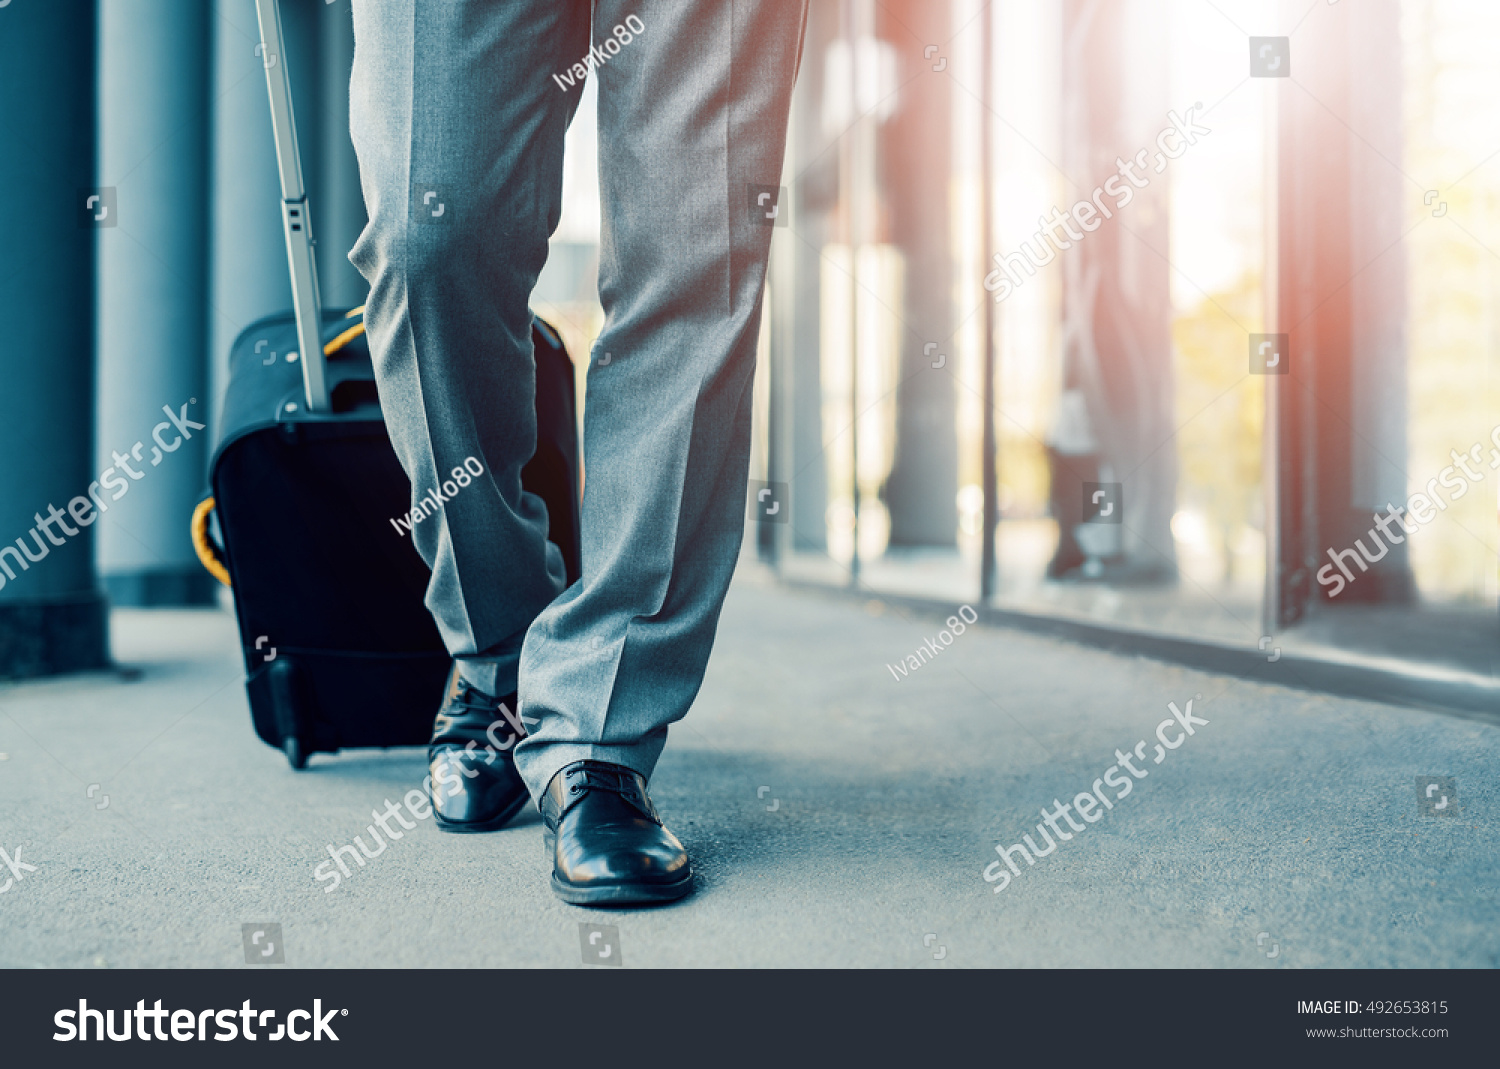 Close up of businessman carrying suitcase while walking through a passenger boarding bridge. #492653815